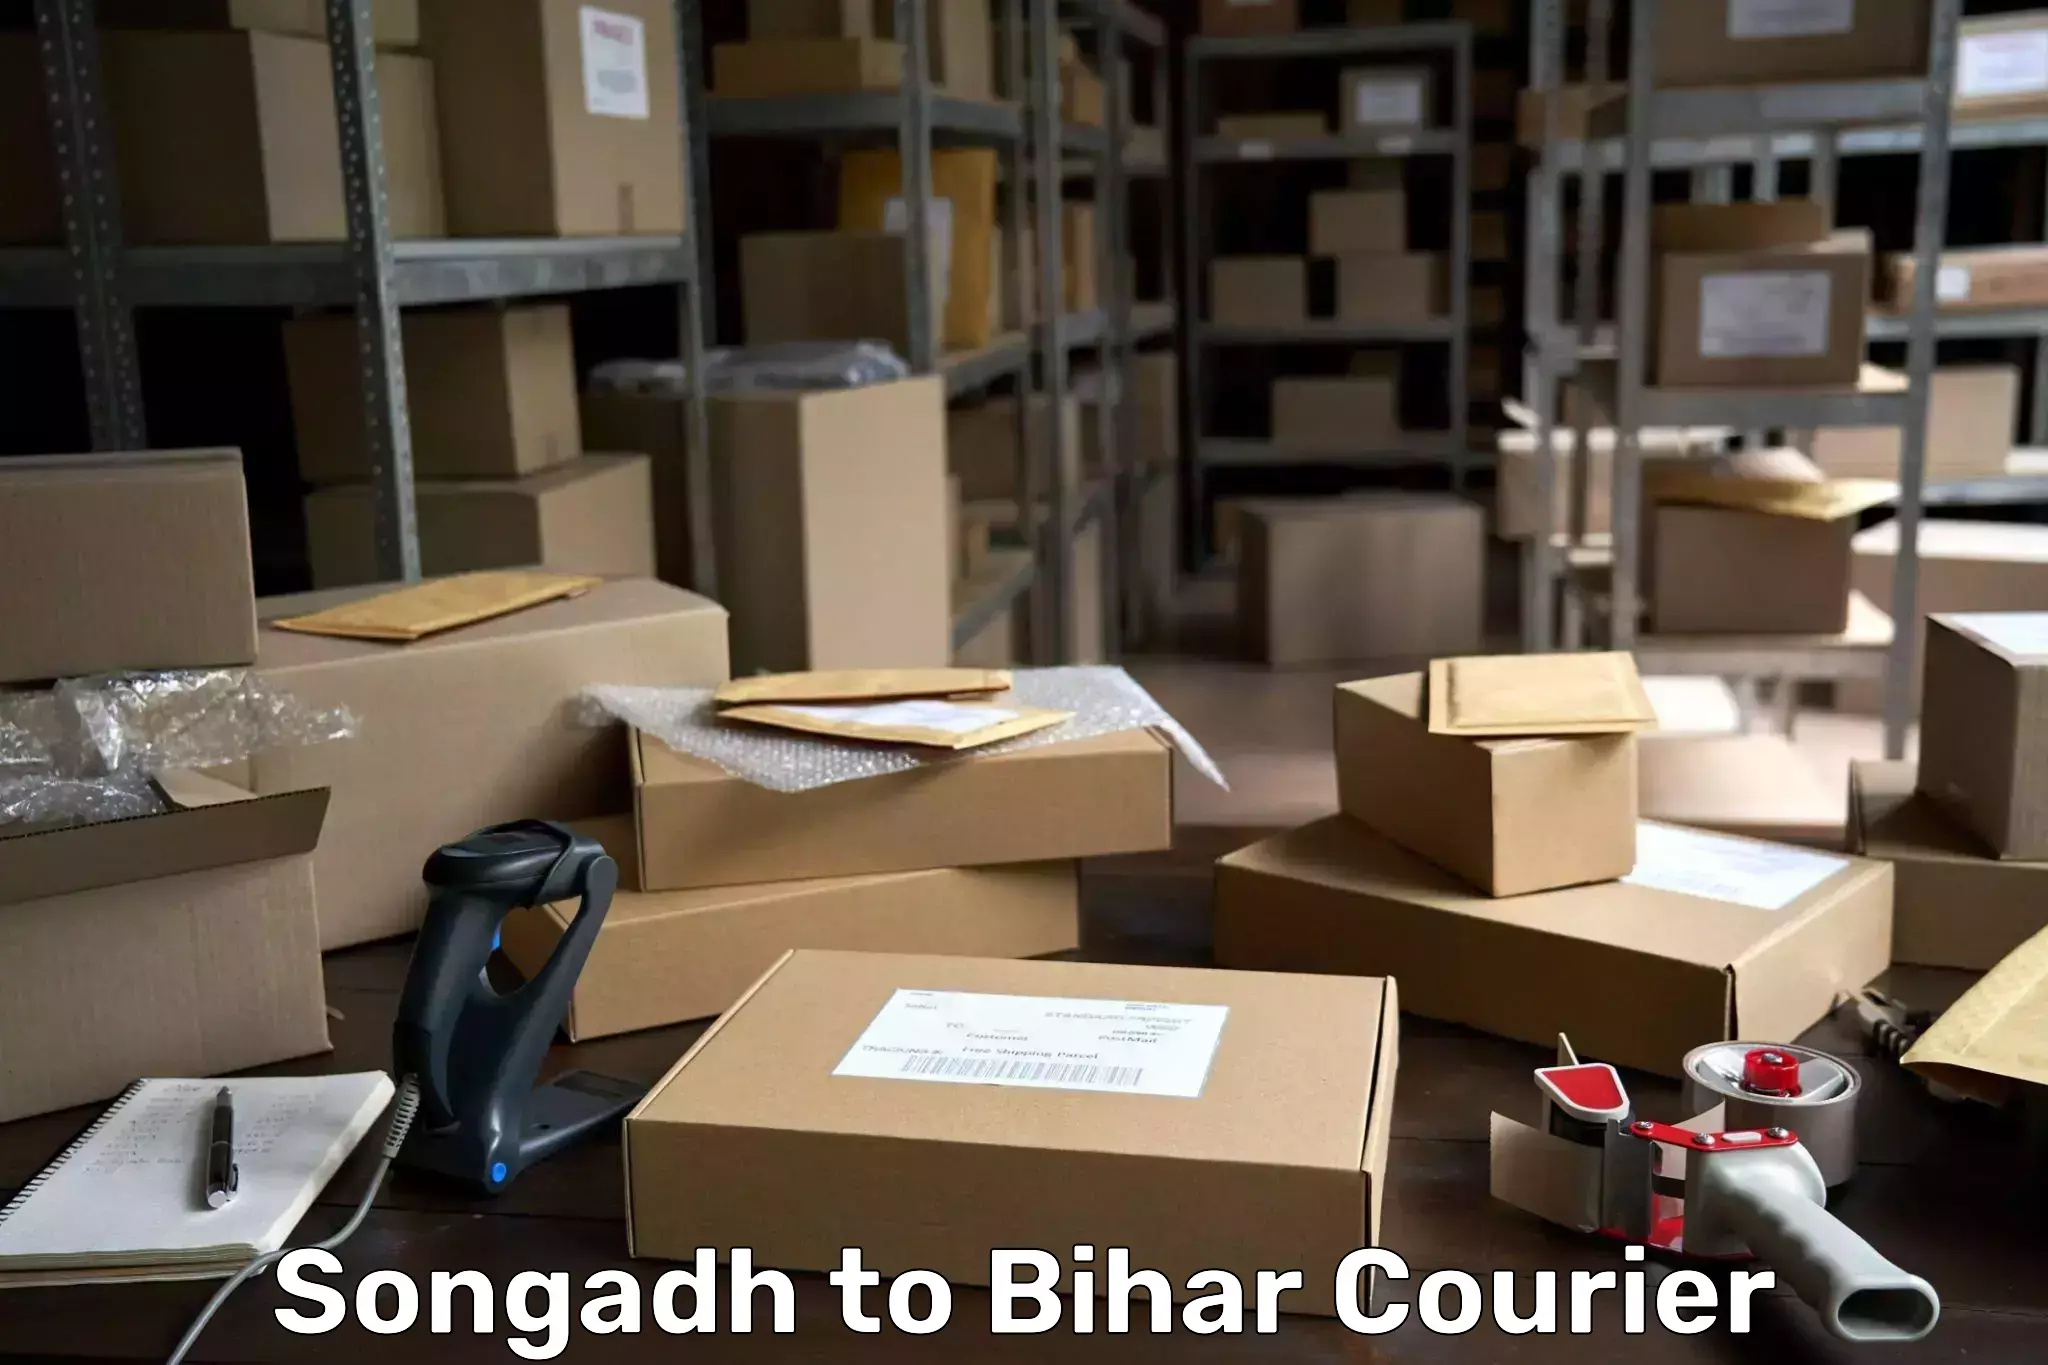 Courier service partnerships Songadh to Kochas